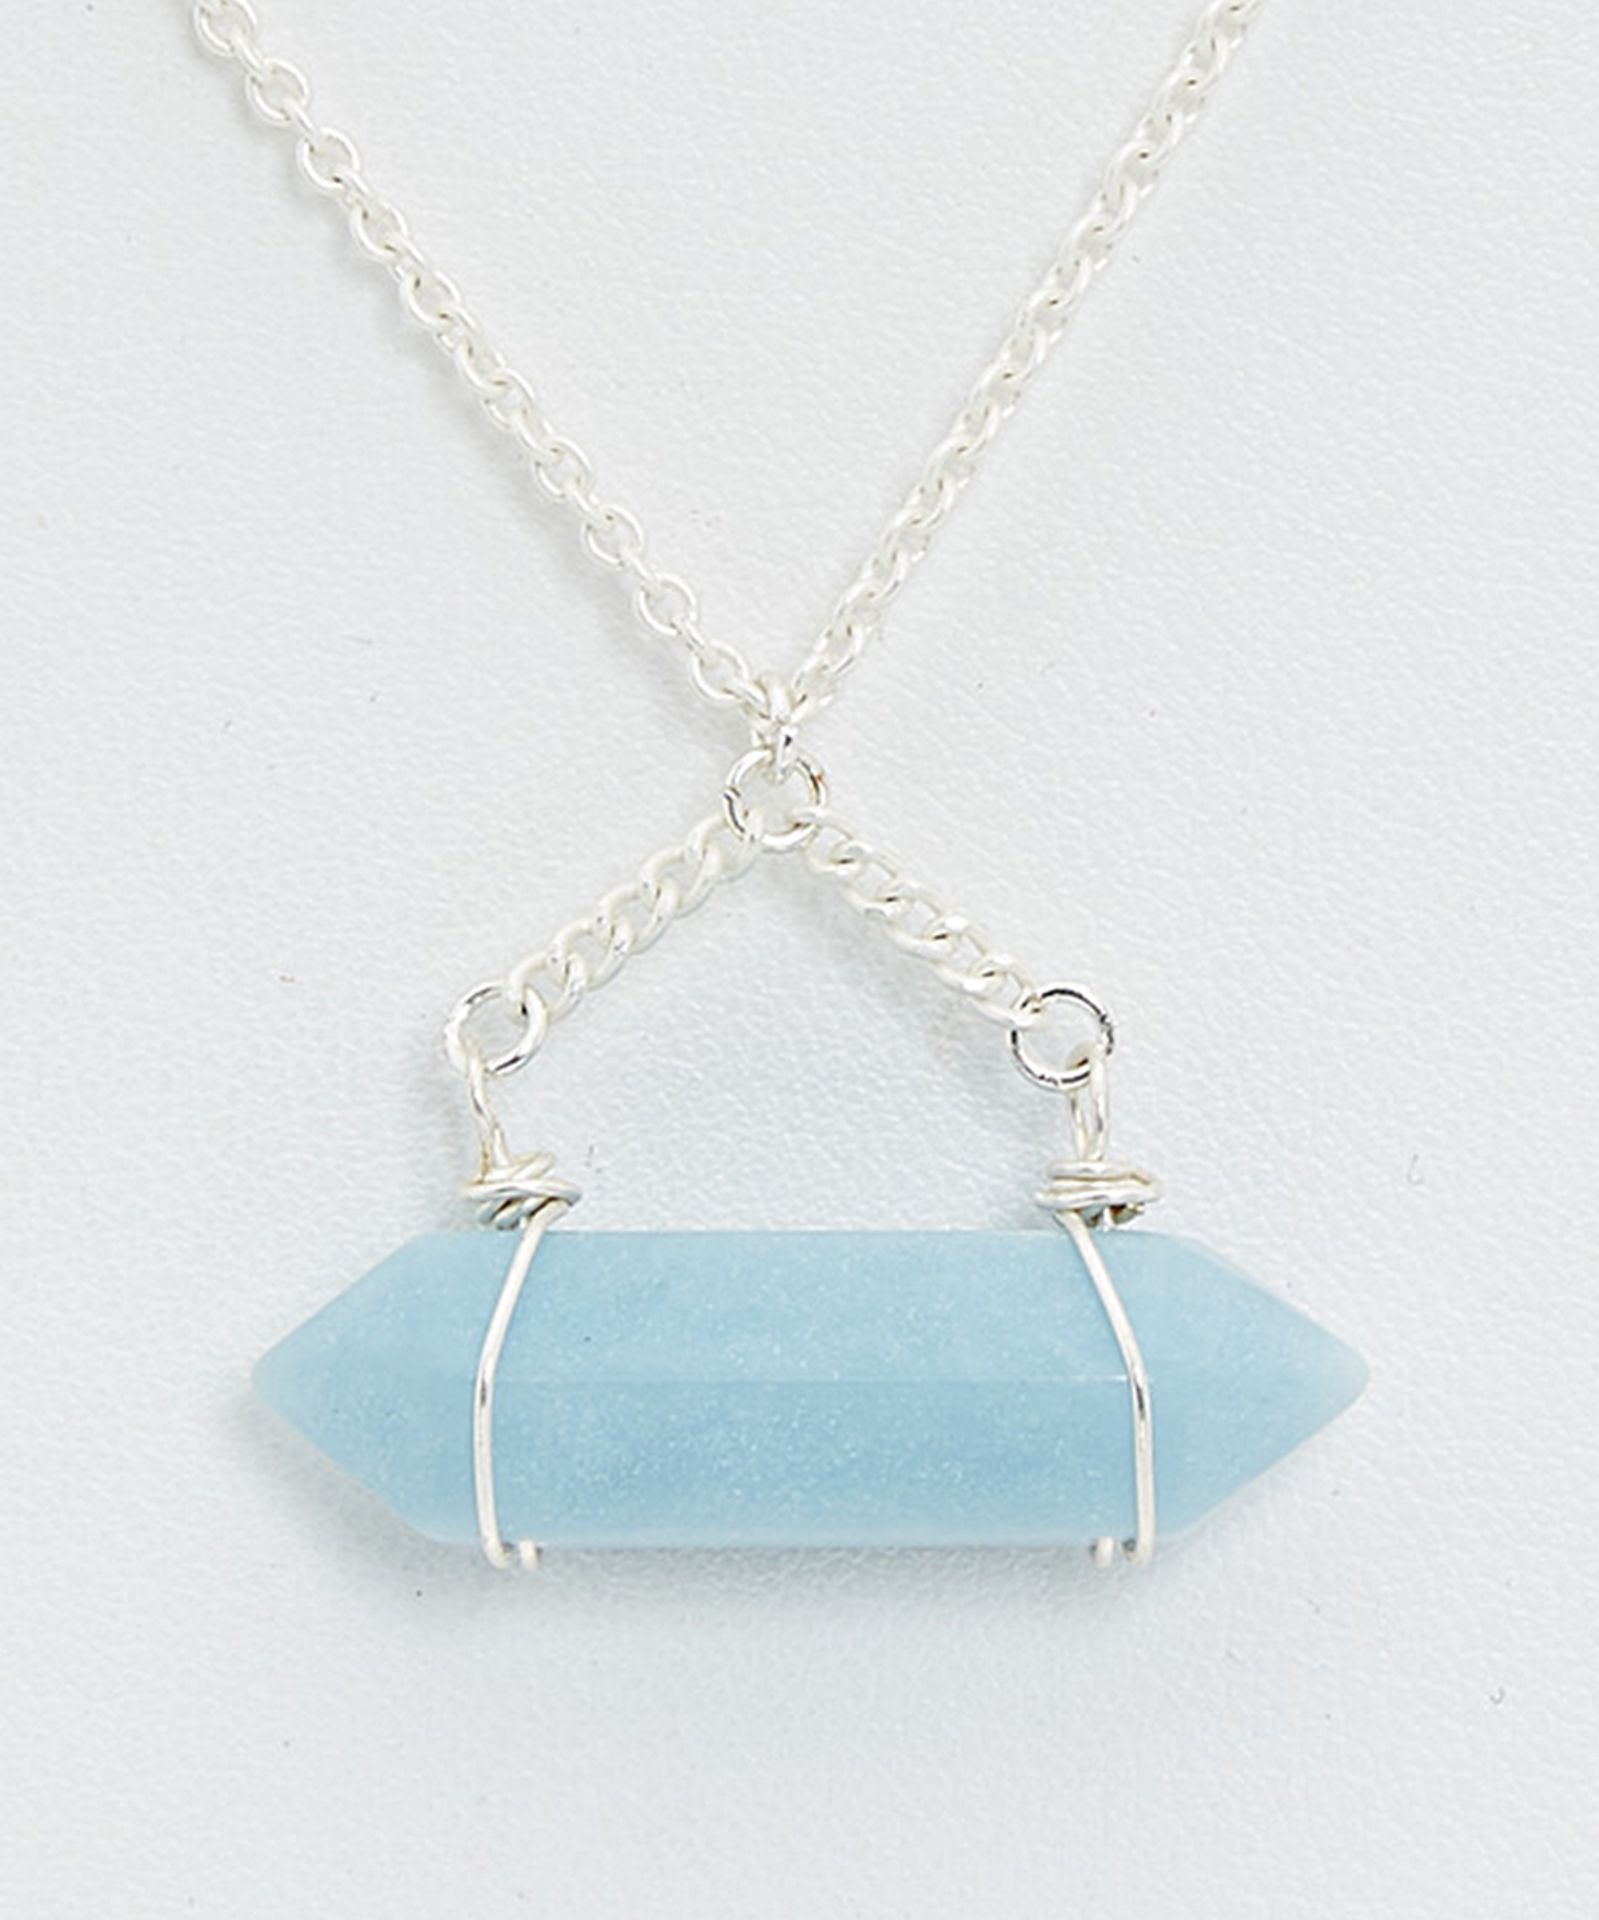 Downtown East Gray Lace Agate Pendant Necklace (Size: One Size) [Ref: 50038557-Box 3] - Image 2 of 3